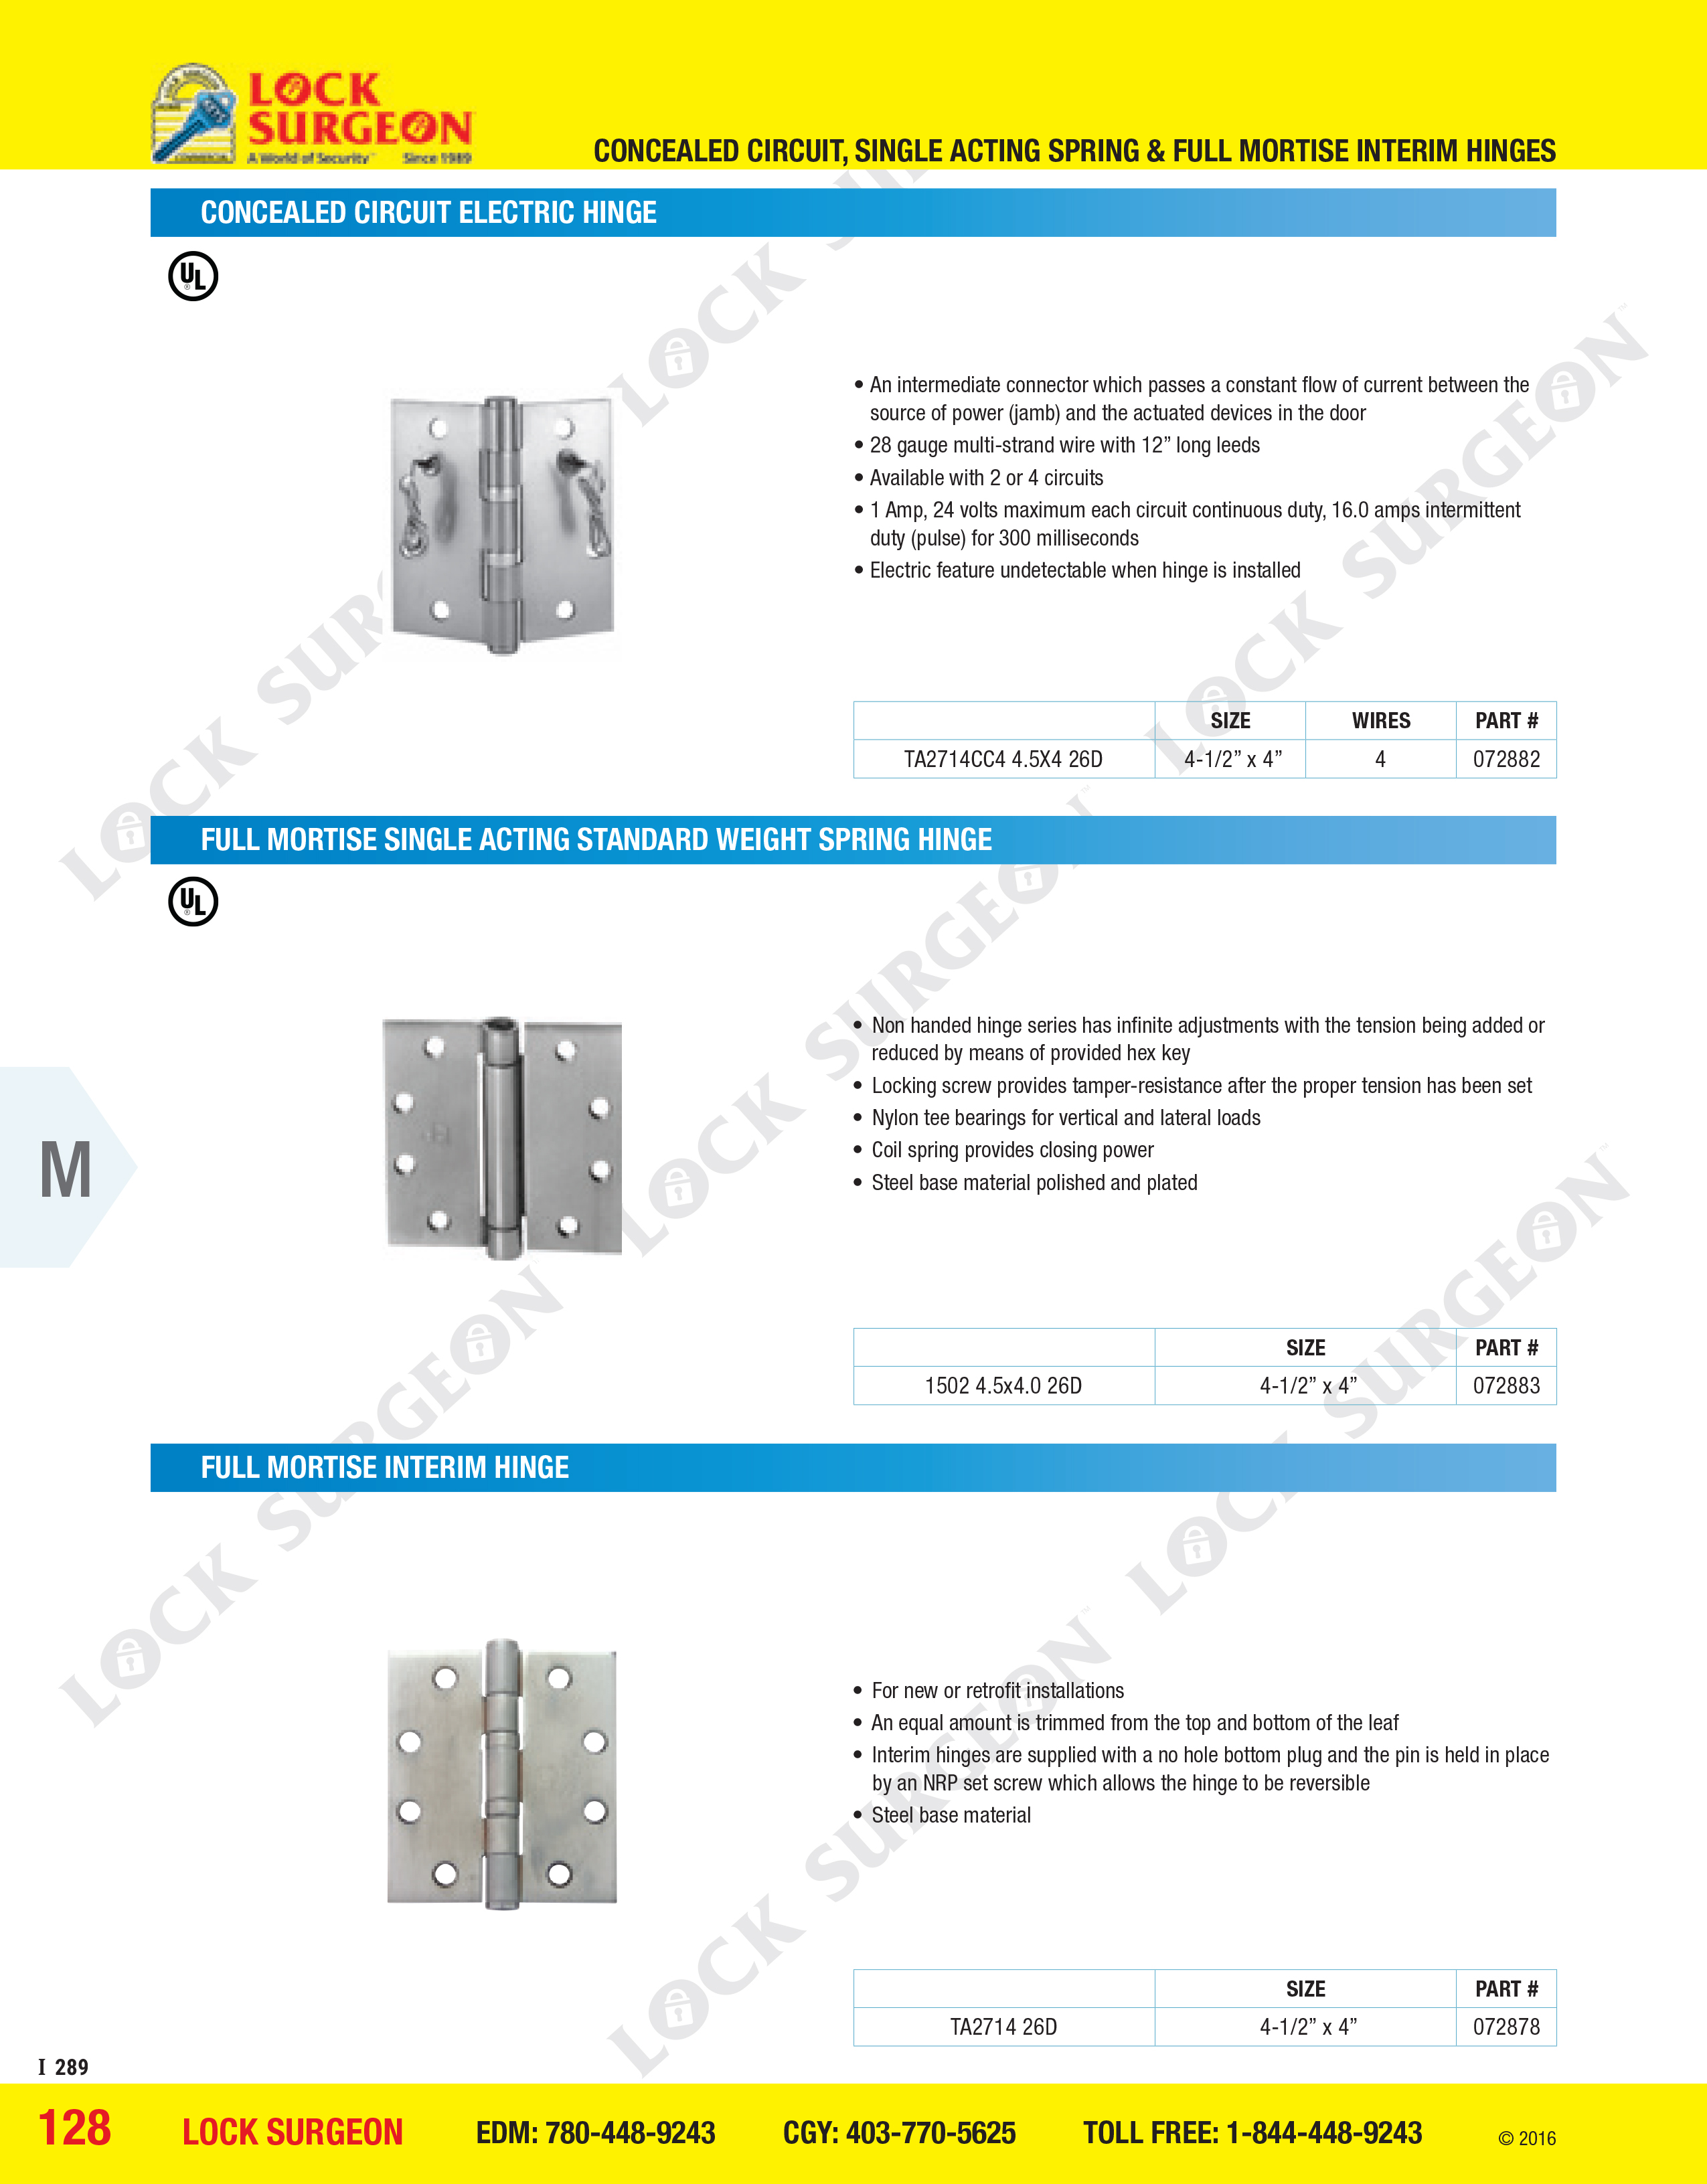 Concealed circuit single-acting spring and full mortise iterim hinges.